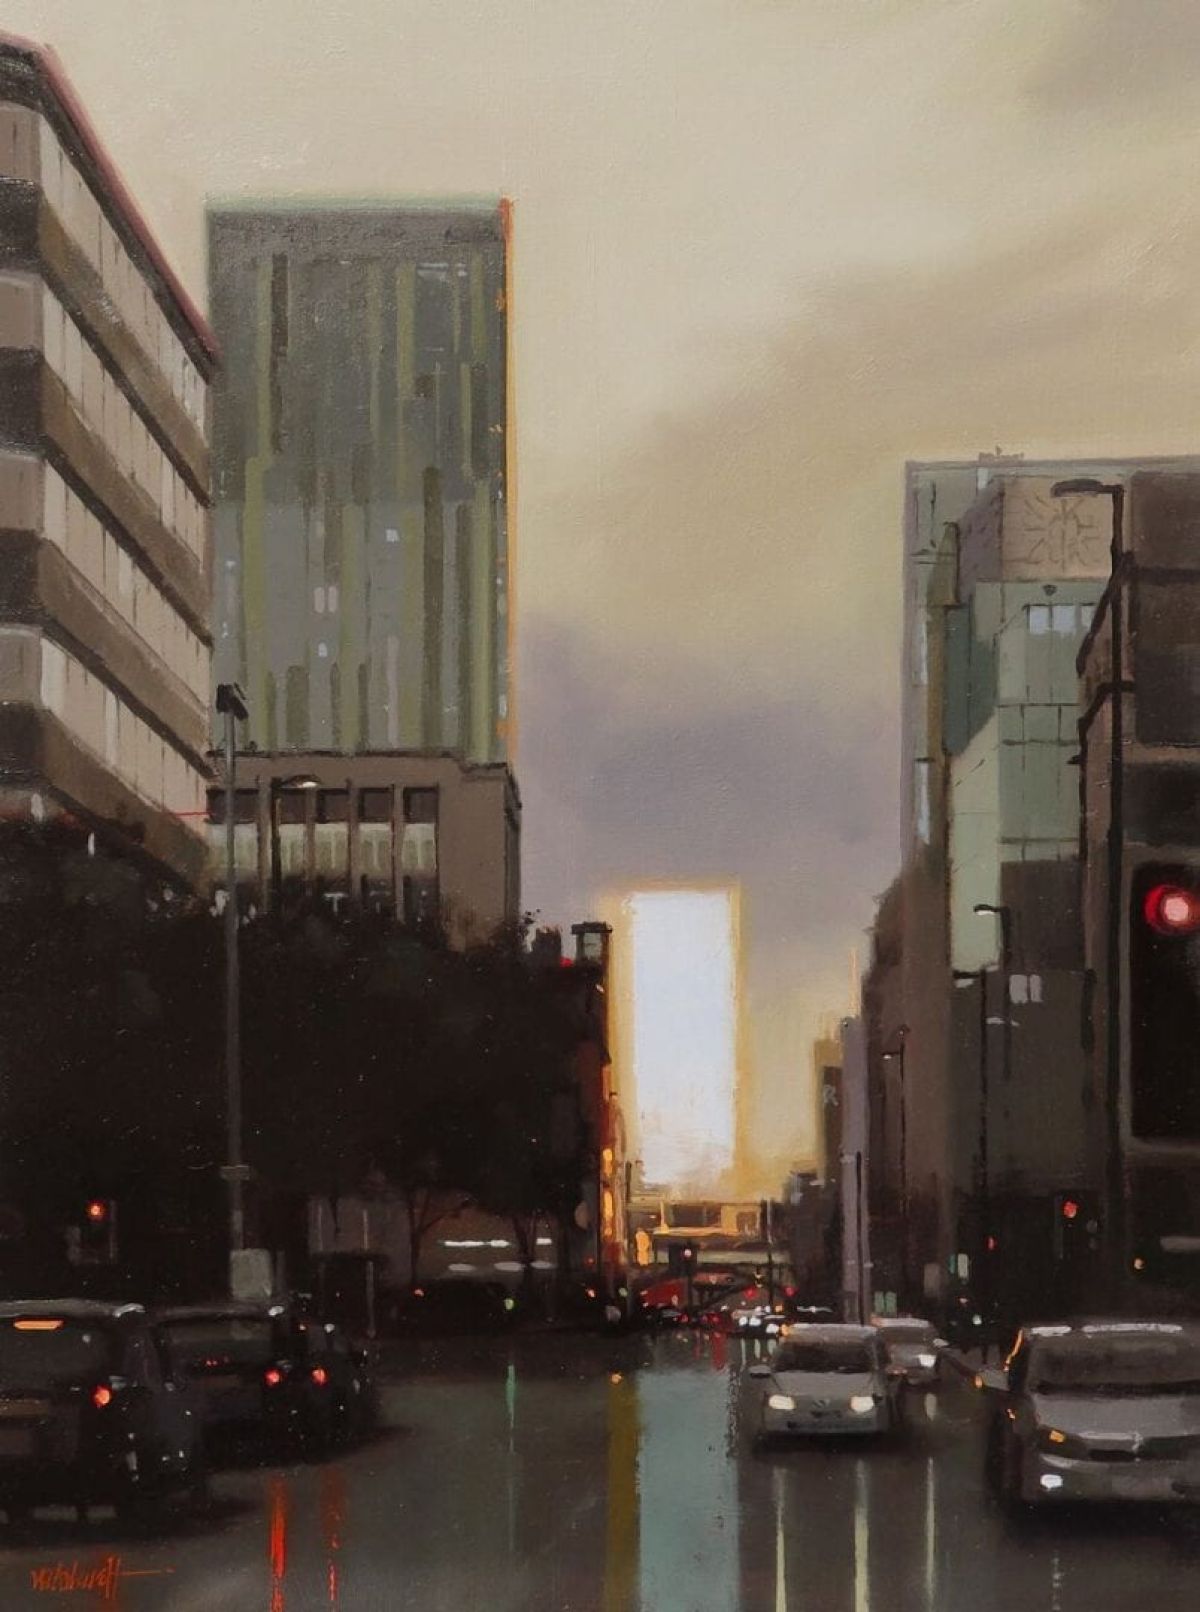 Preview: Michael Ashcroft’s ‘This is Manchester’